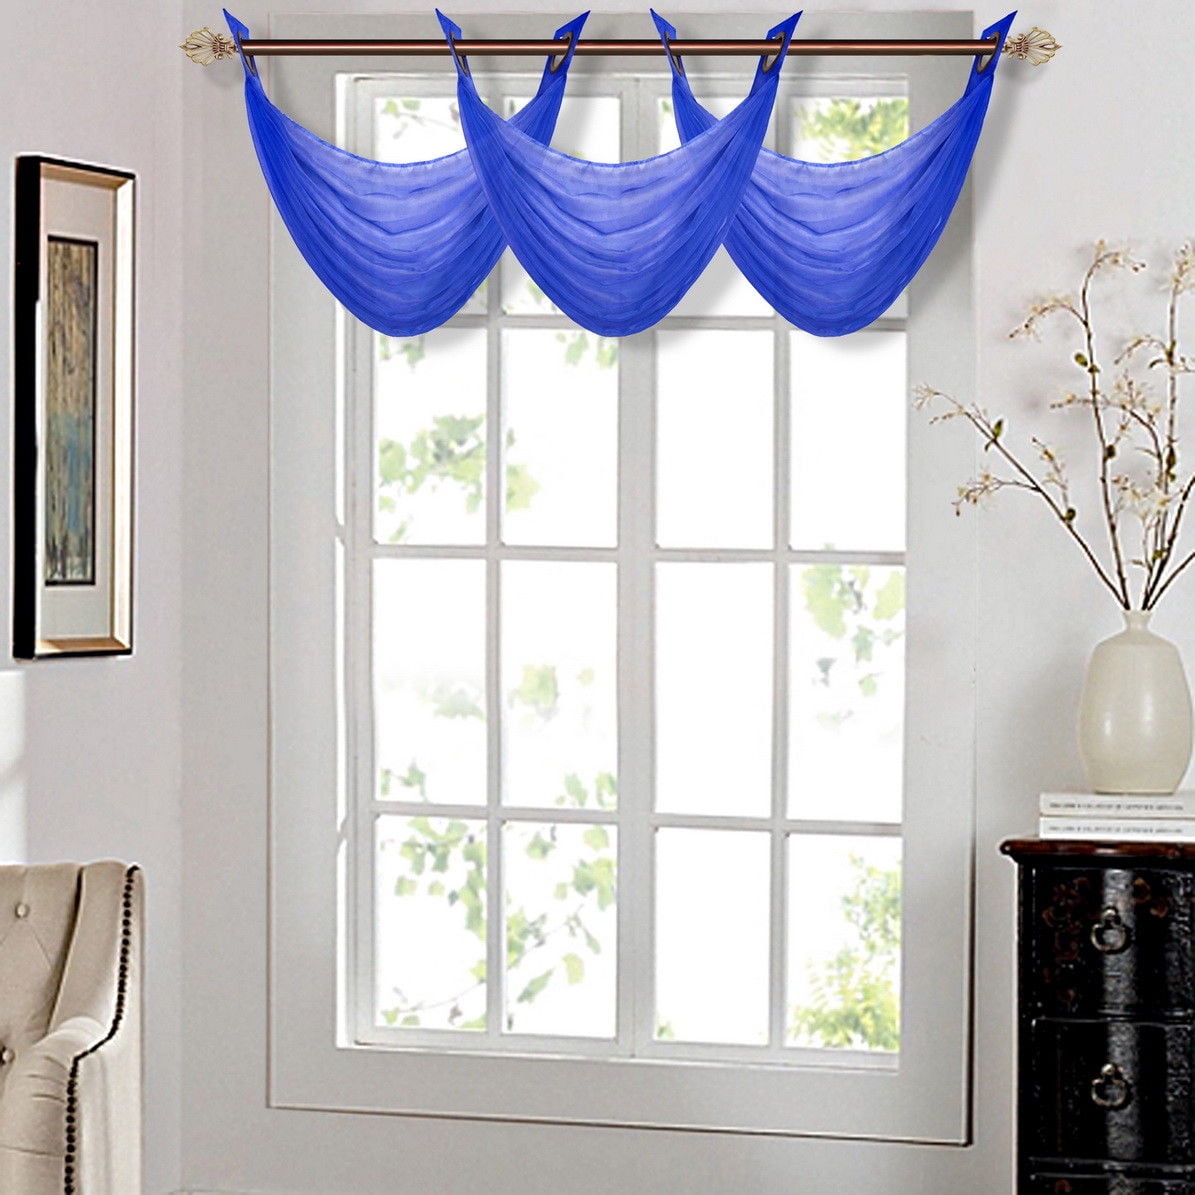 K36 6PC WHOLESALE DEAL WATERFALL GROMMET VOILE SHEER VALANCE WINDOW TREATMENT 